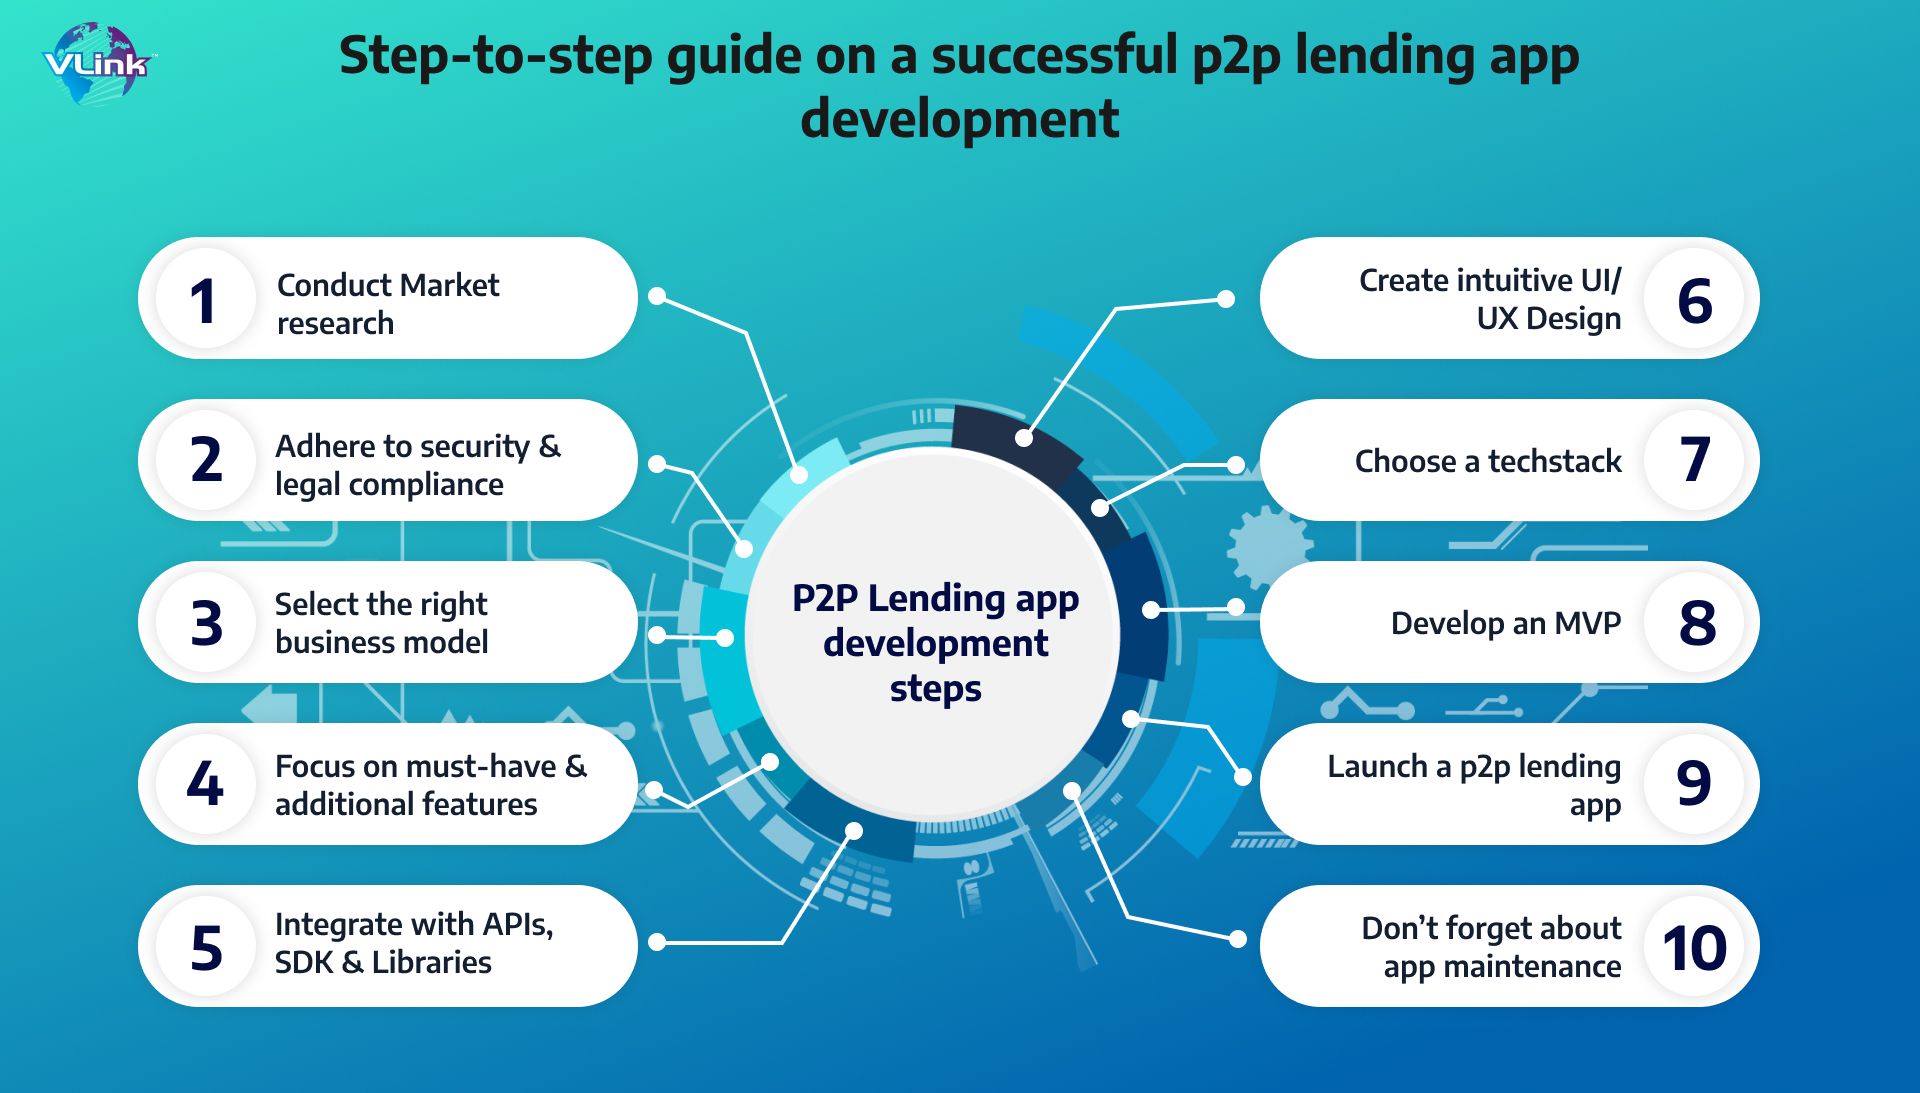 Step-to-Step Guide on a Successful P2P Lending App Development 